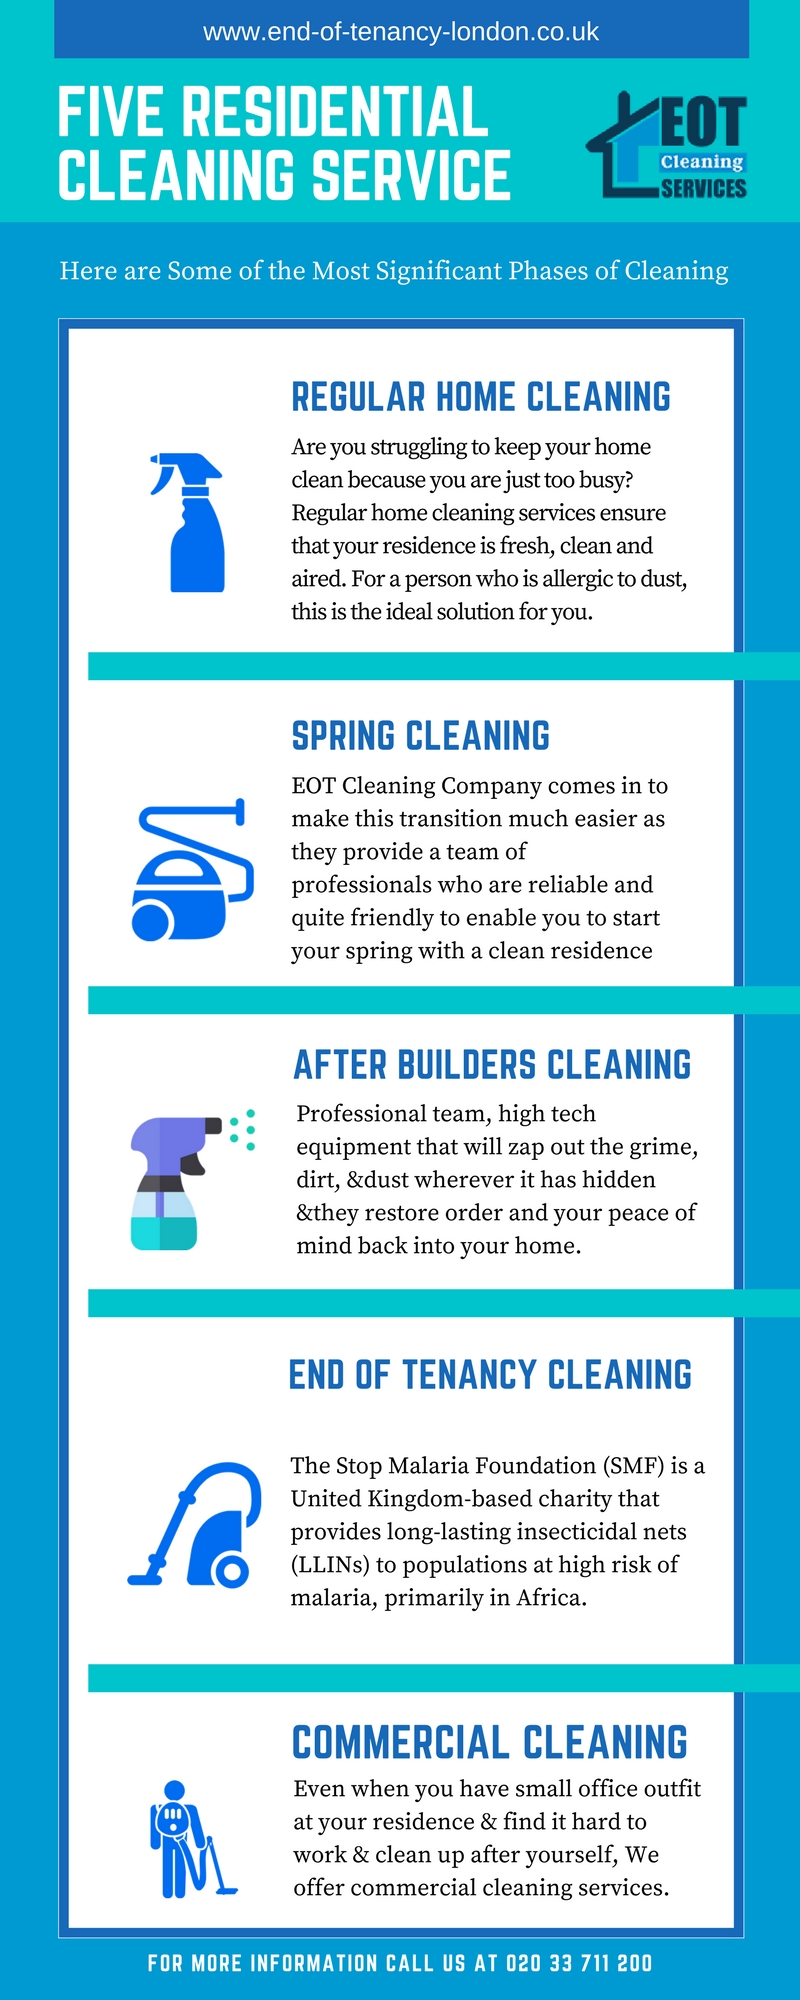 5-Residential-Cleaning-Services